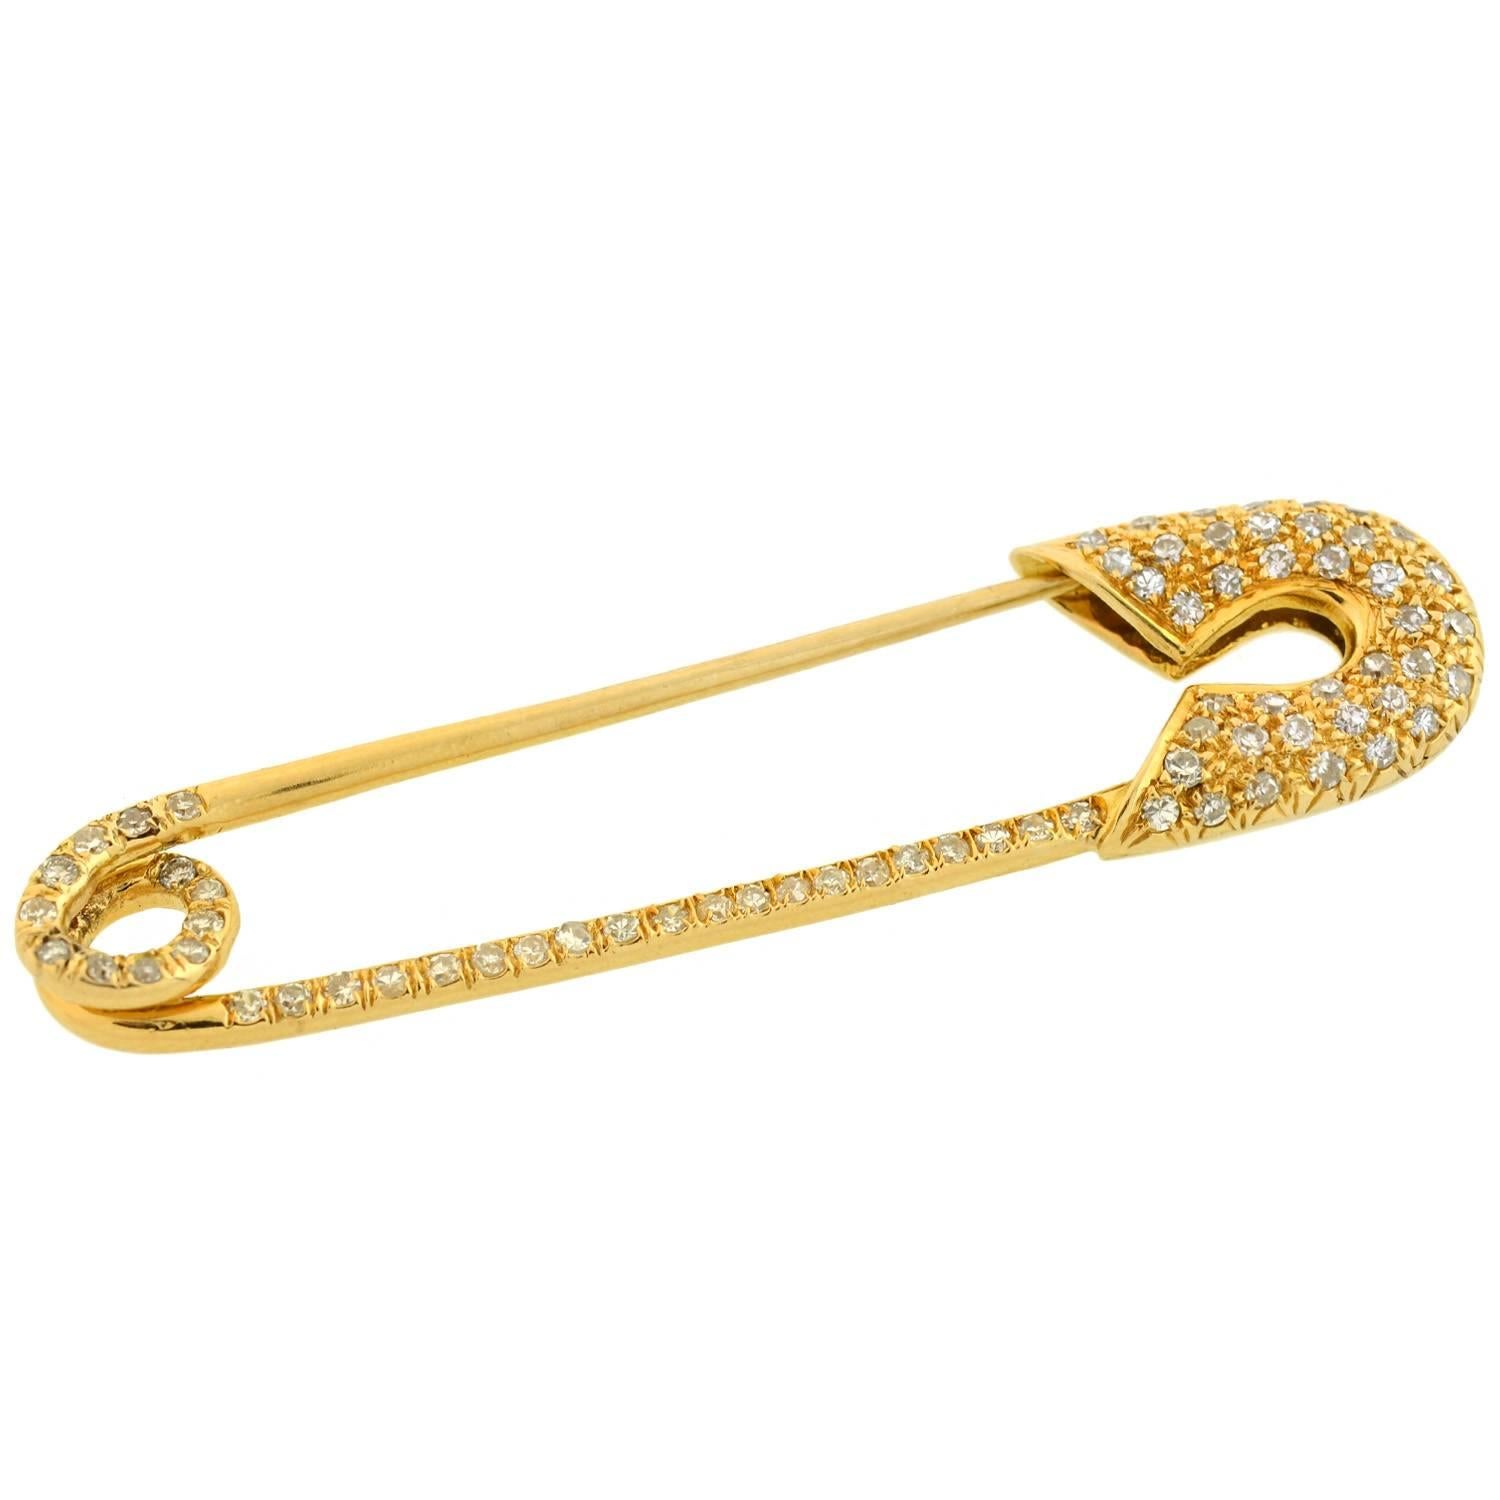 This diamond safety pin by Tiffany & Co. is quite a stylish estate piece! Made of 18kt yellow gold, the design consists of a fully functional safety pin with a sparkling pavé diamond encrusted surface. The contrast between the vibrant yellow gold